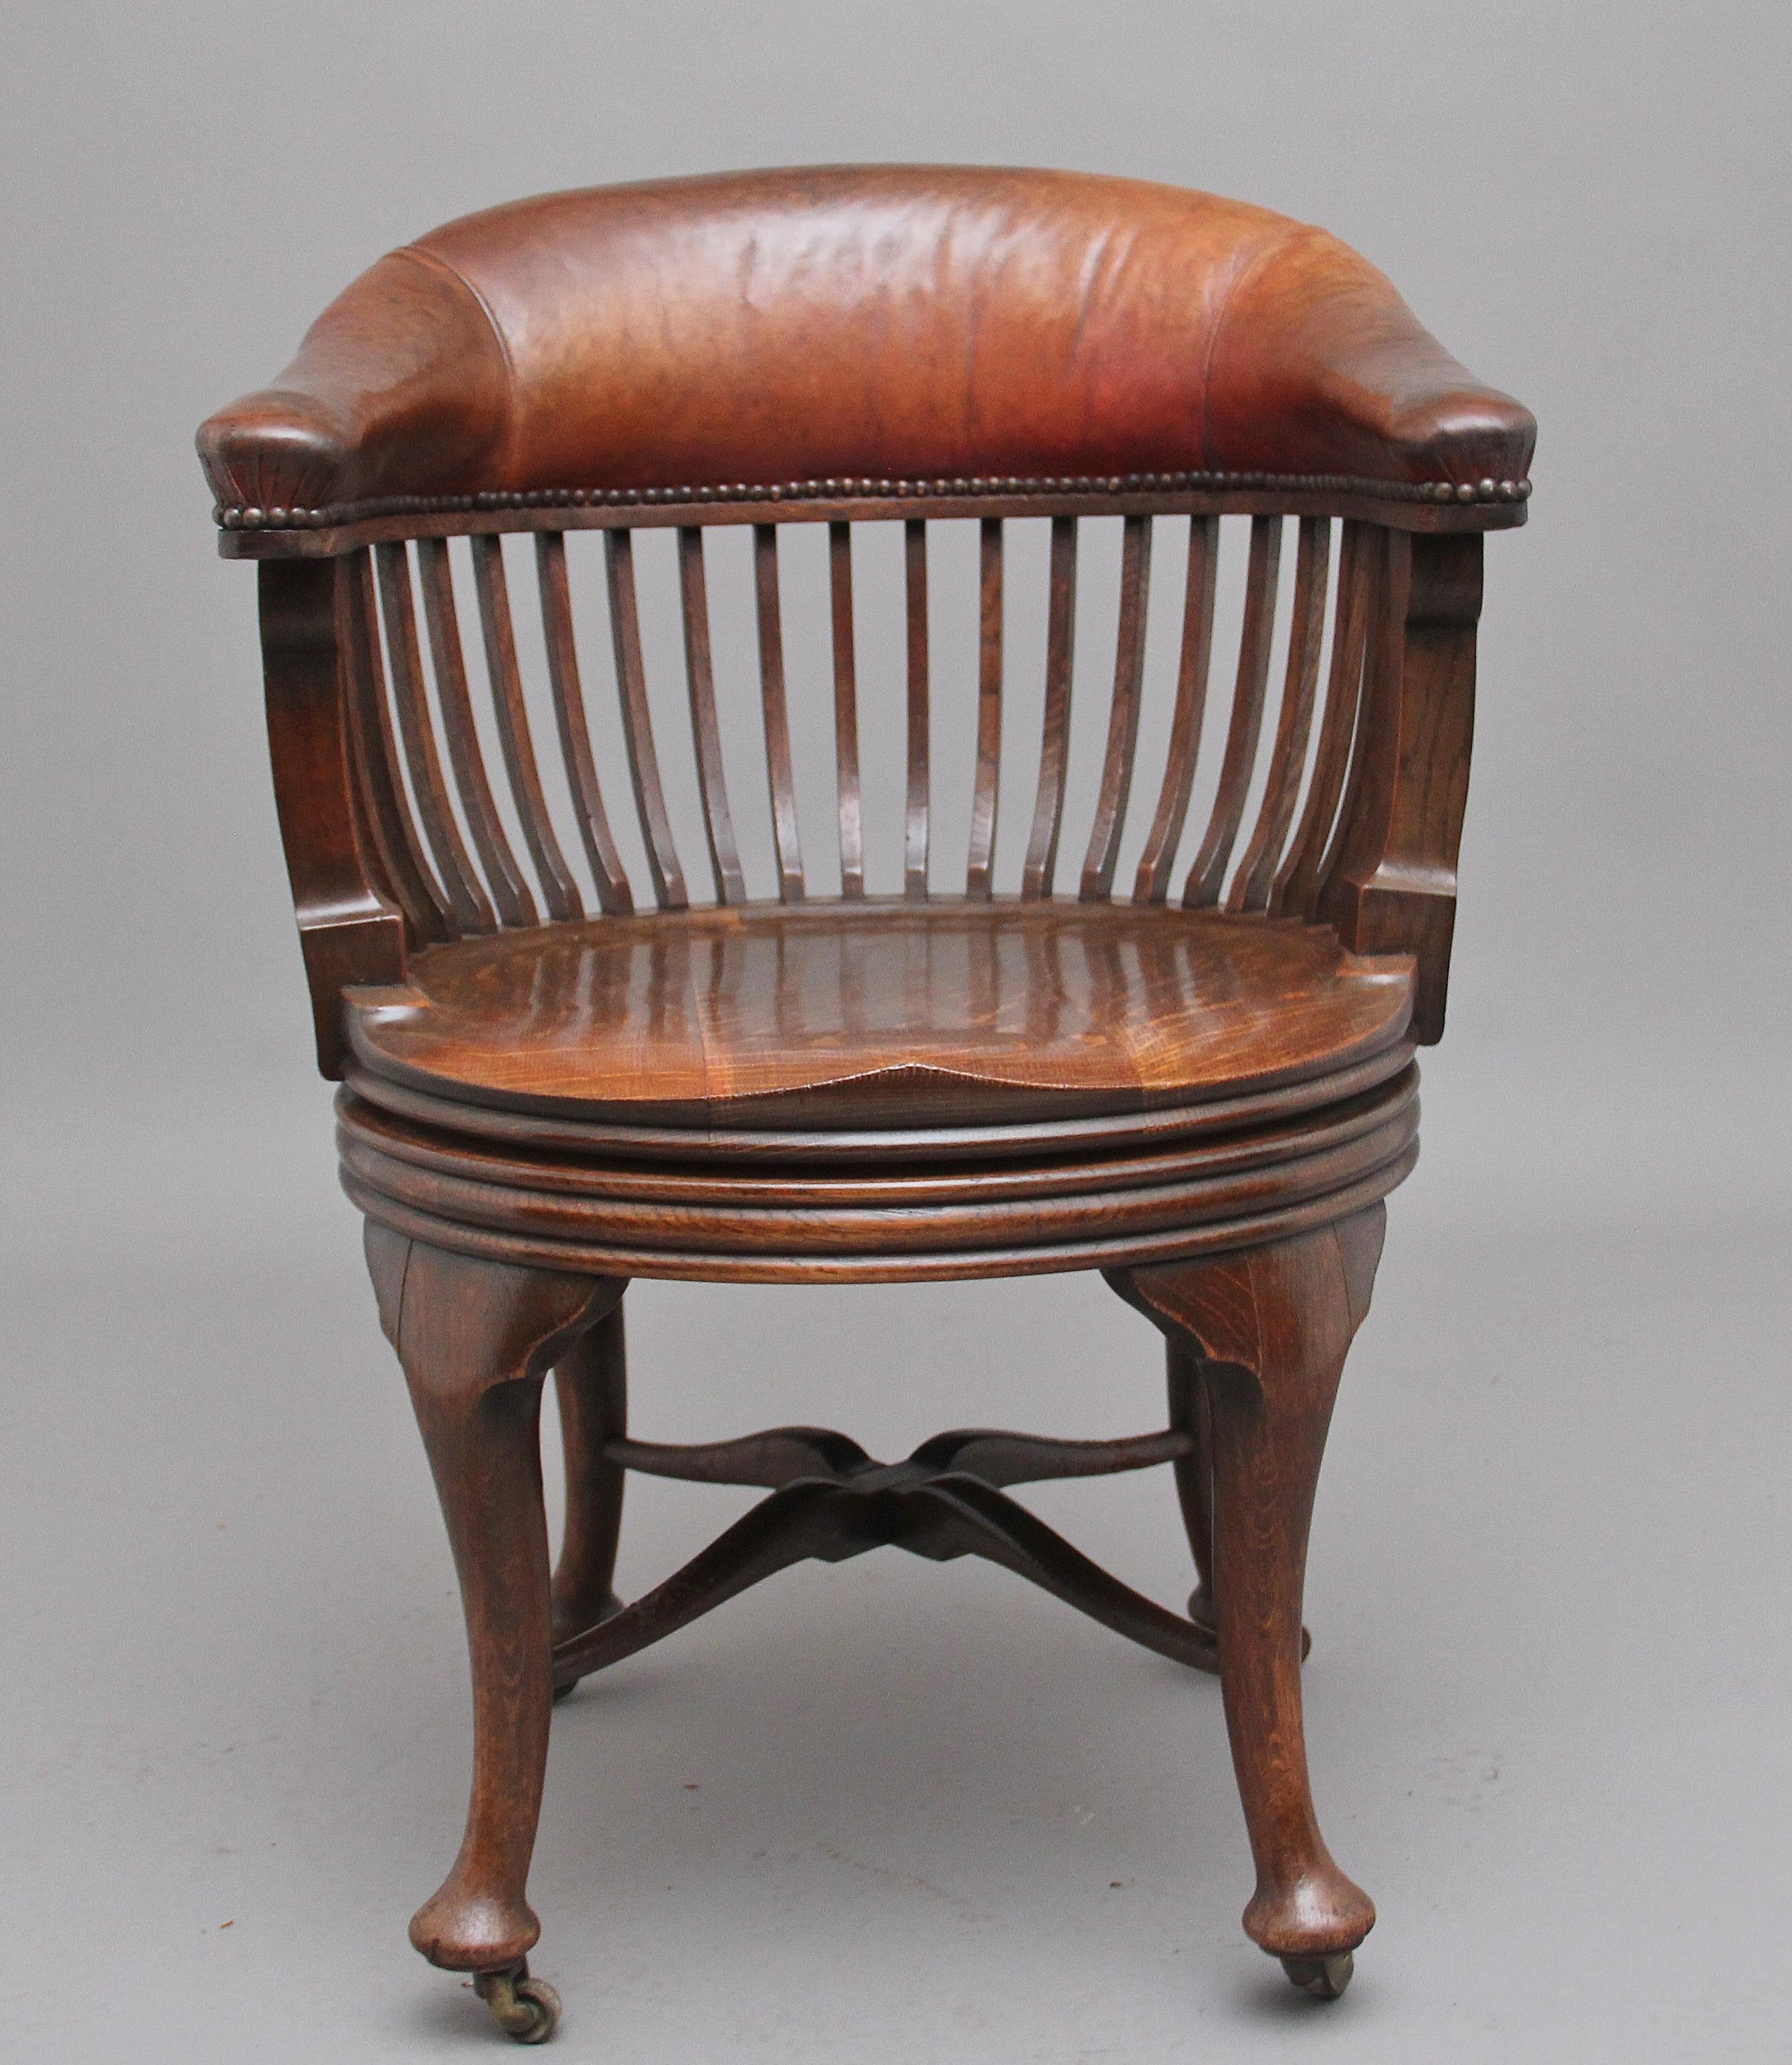 19th century oak and leather swivel desk chair, having a brown and red leather back support with brass stud decoration, finely shaped square upright supports, circular saddle seat with a reeded edge underneath, standing on shaped turned legs united